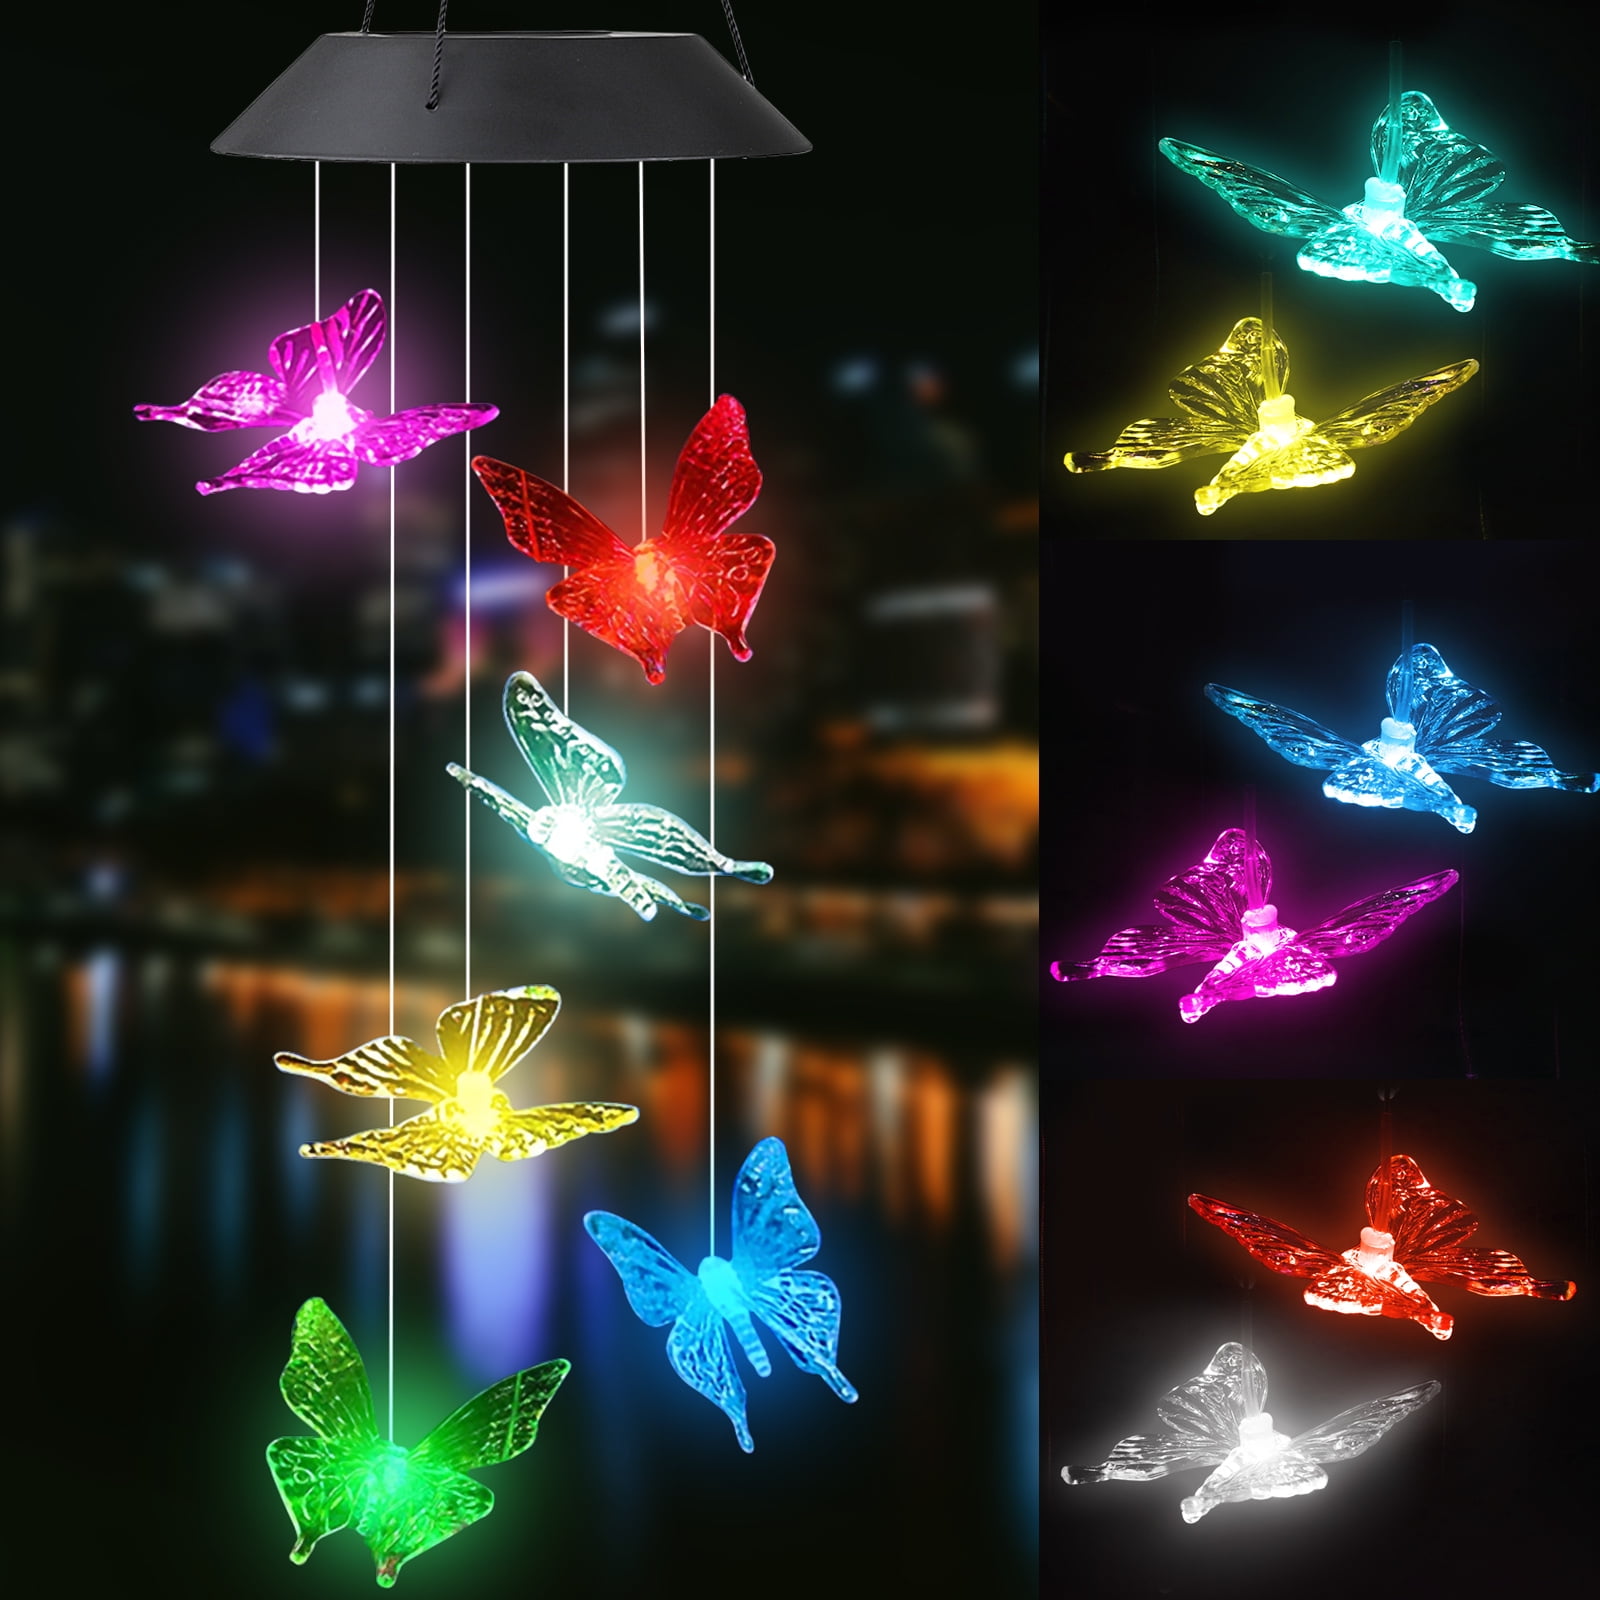 Butterfly Solar Lights Outdoor Decoration for Home/Yard/Patio/Garden/Mom Gift Solar Butterfly Wind Chimes wish Bells,7 Color Changing Solar Wind Chime Light Solar Powered Wind Chimes Waterproof 